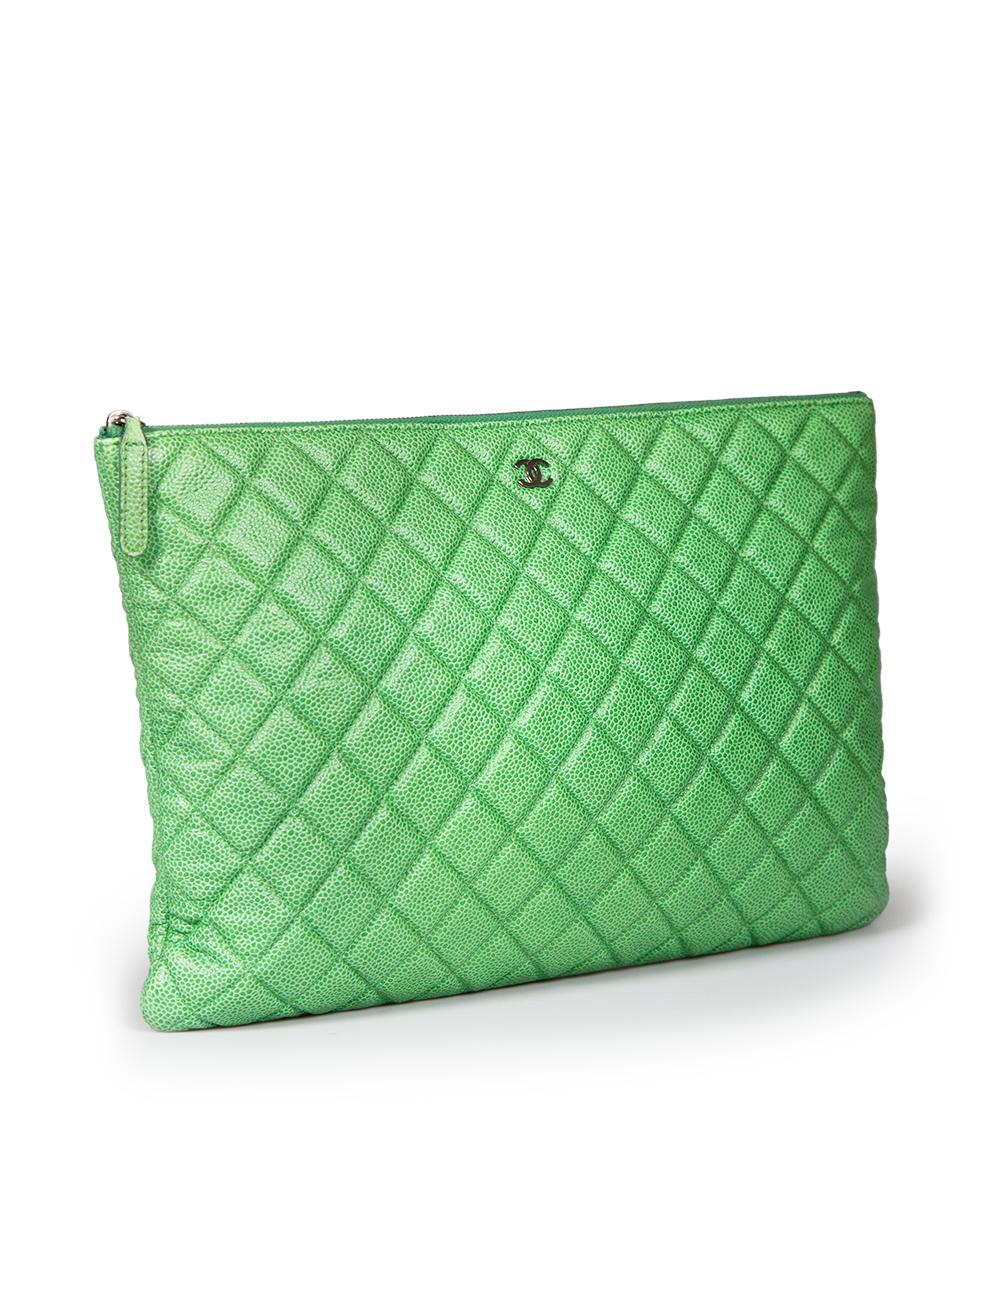 CONDITION is Very good. Minimal wear to clutch is evident. Minimal discolouration to bottom corners. The zipper pull show signs of abrasion on this used Chanel designer resale item.
 
 
 
 Details
 
 
 Model: O-Case
 
 Green
 
 Caviar leather
 
